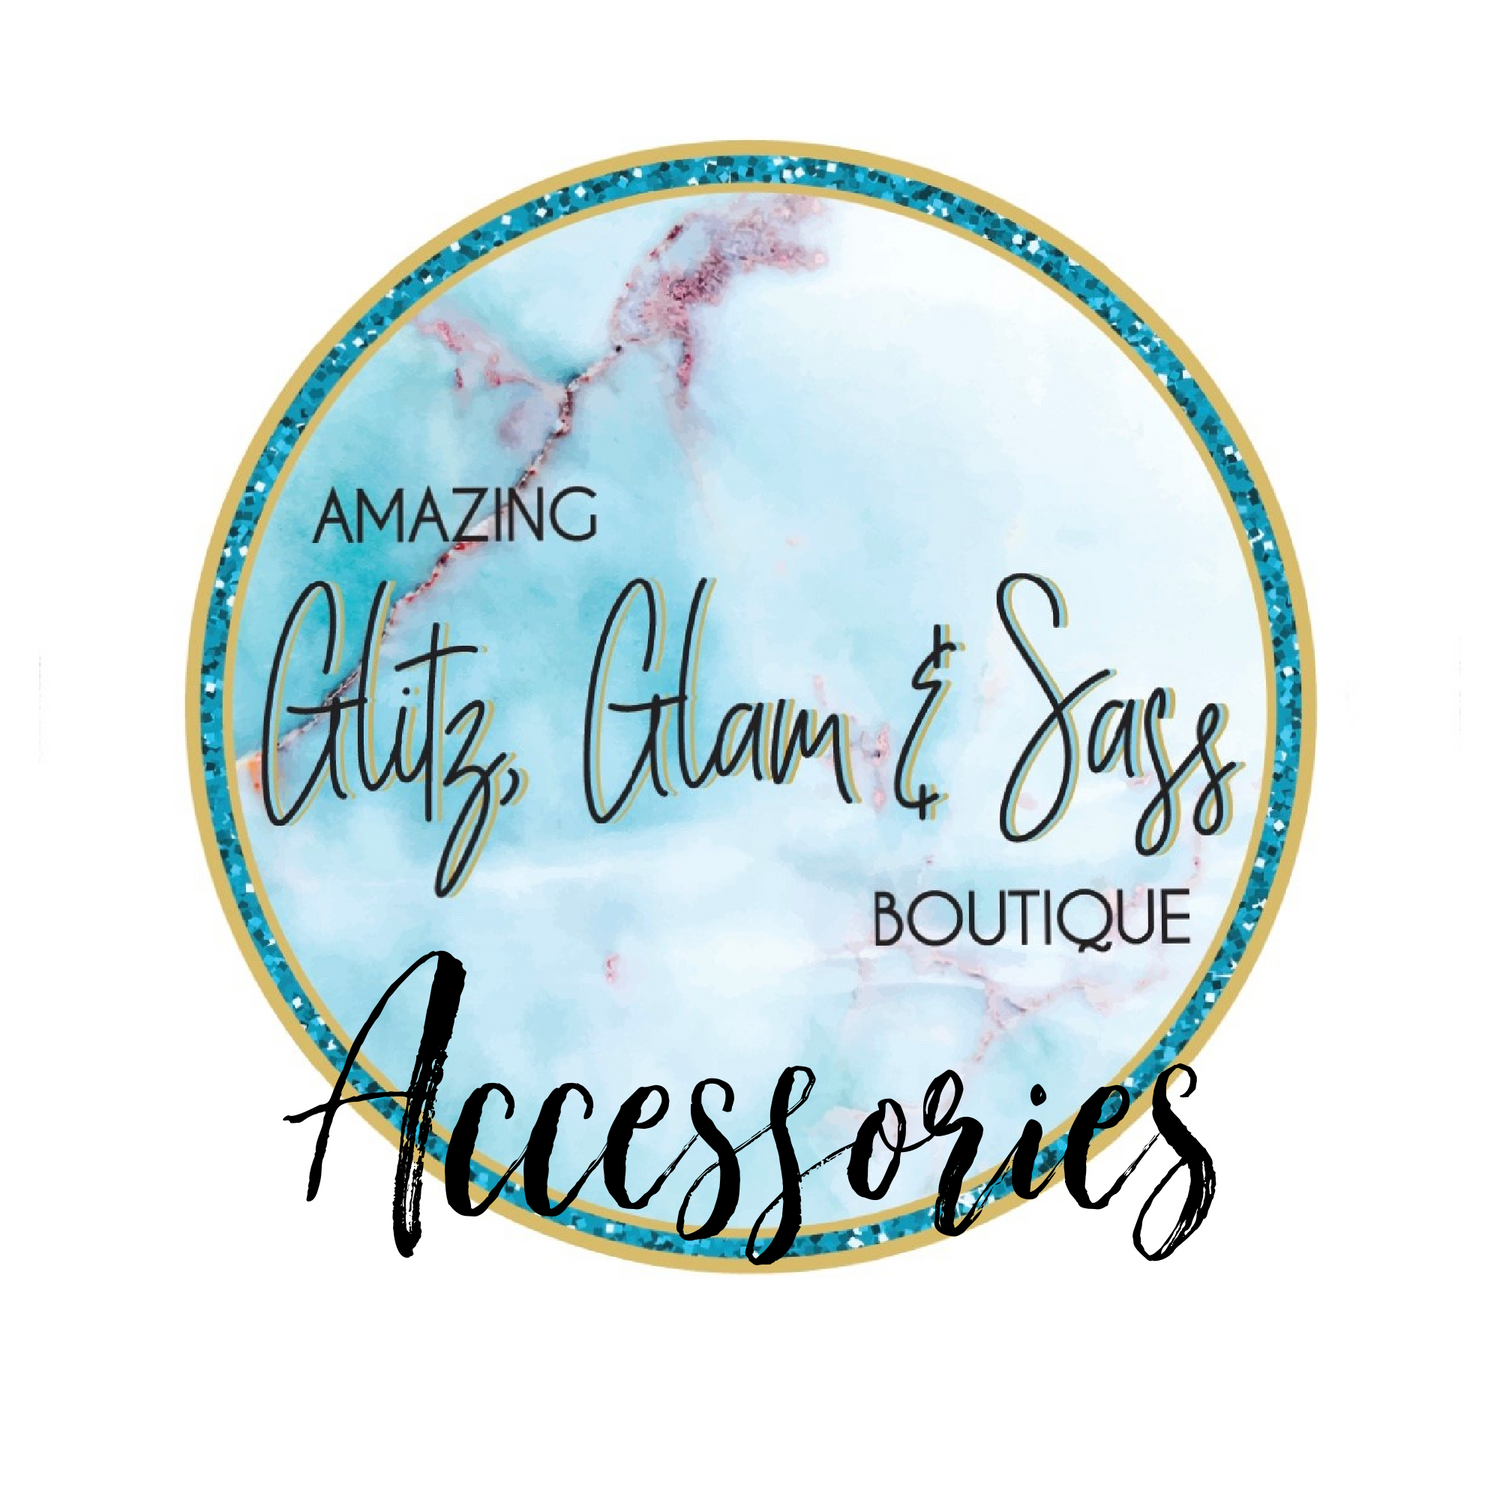 Collections – Amazing Glitz, Glam & Sass Boutique